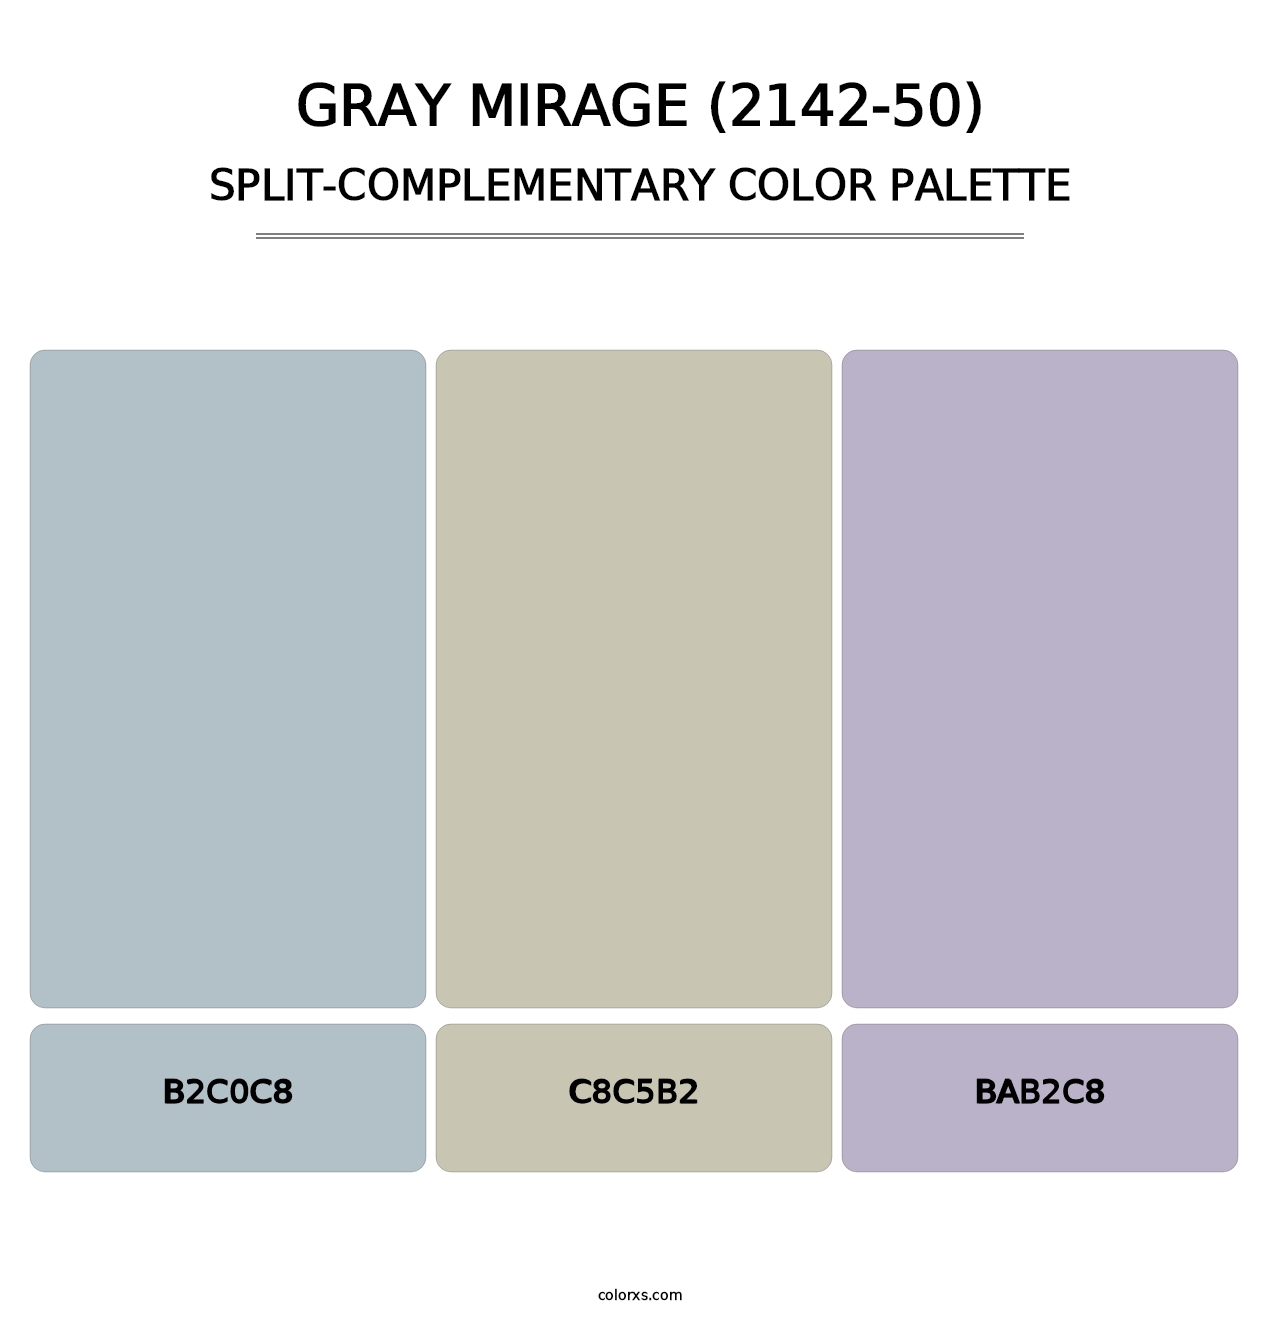 Gray Mirage (2142-50) - Split-Complementary Color Palette